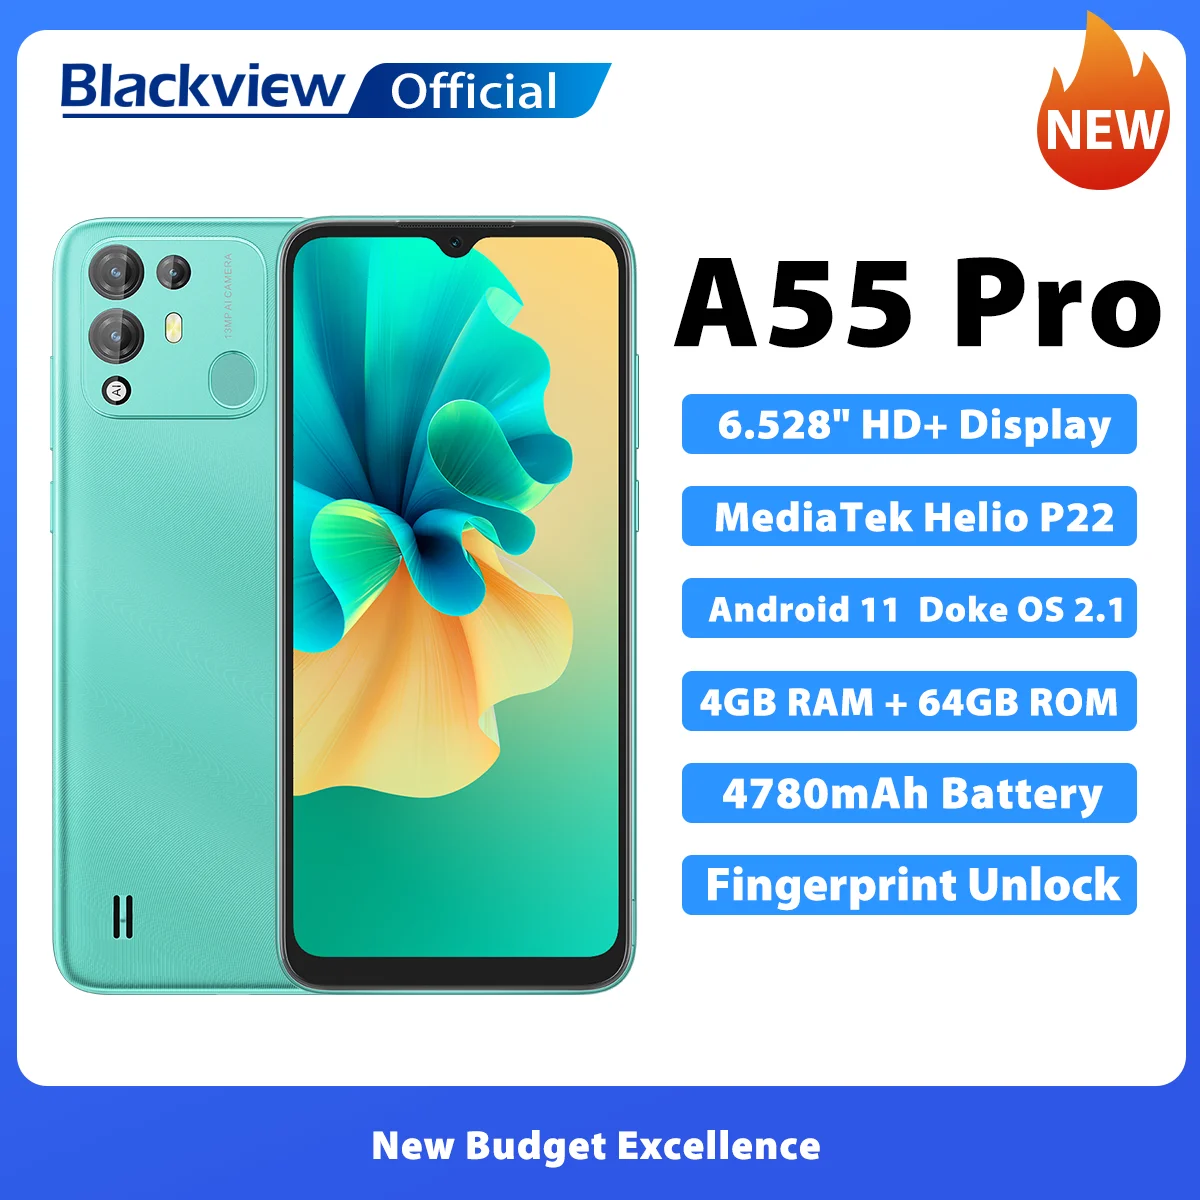 

Blackview A55 Pro Smartphone Android 11 6.528" HD+ Display Mobile Phone 4GB+64GB Helio P22 Octa Core 13MP Camera 4780mAh